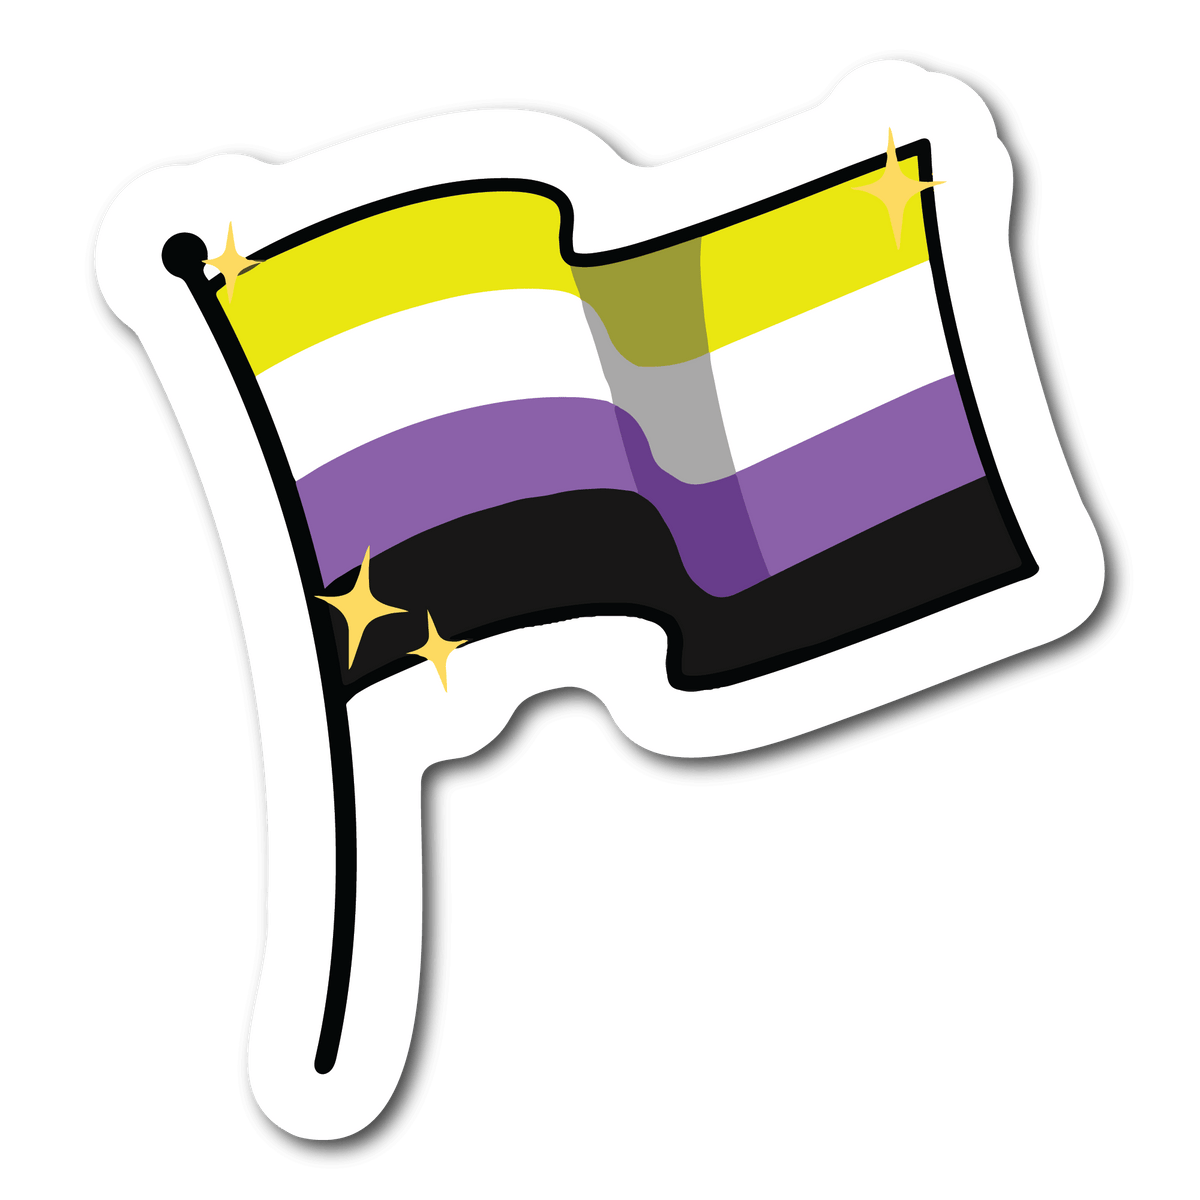 Small Nonbinary Pride Flag Waterproof Sticker for LGBTQ Name Tags